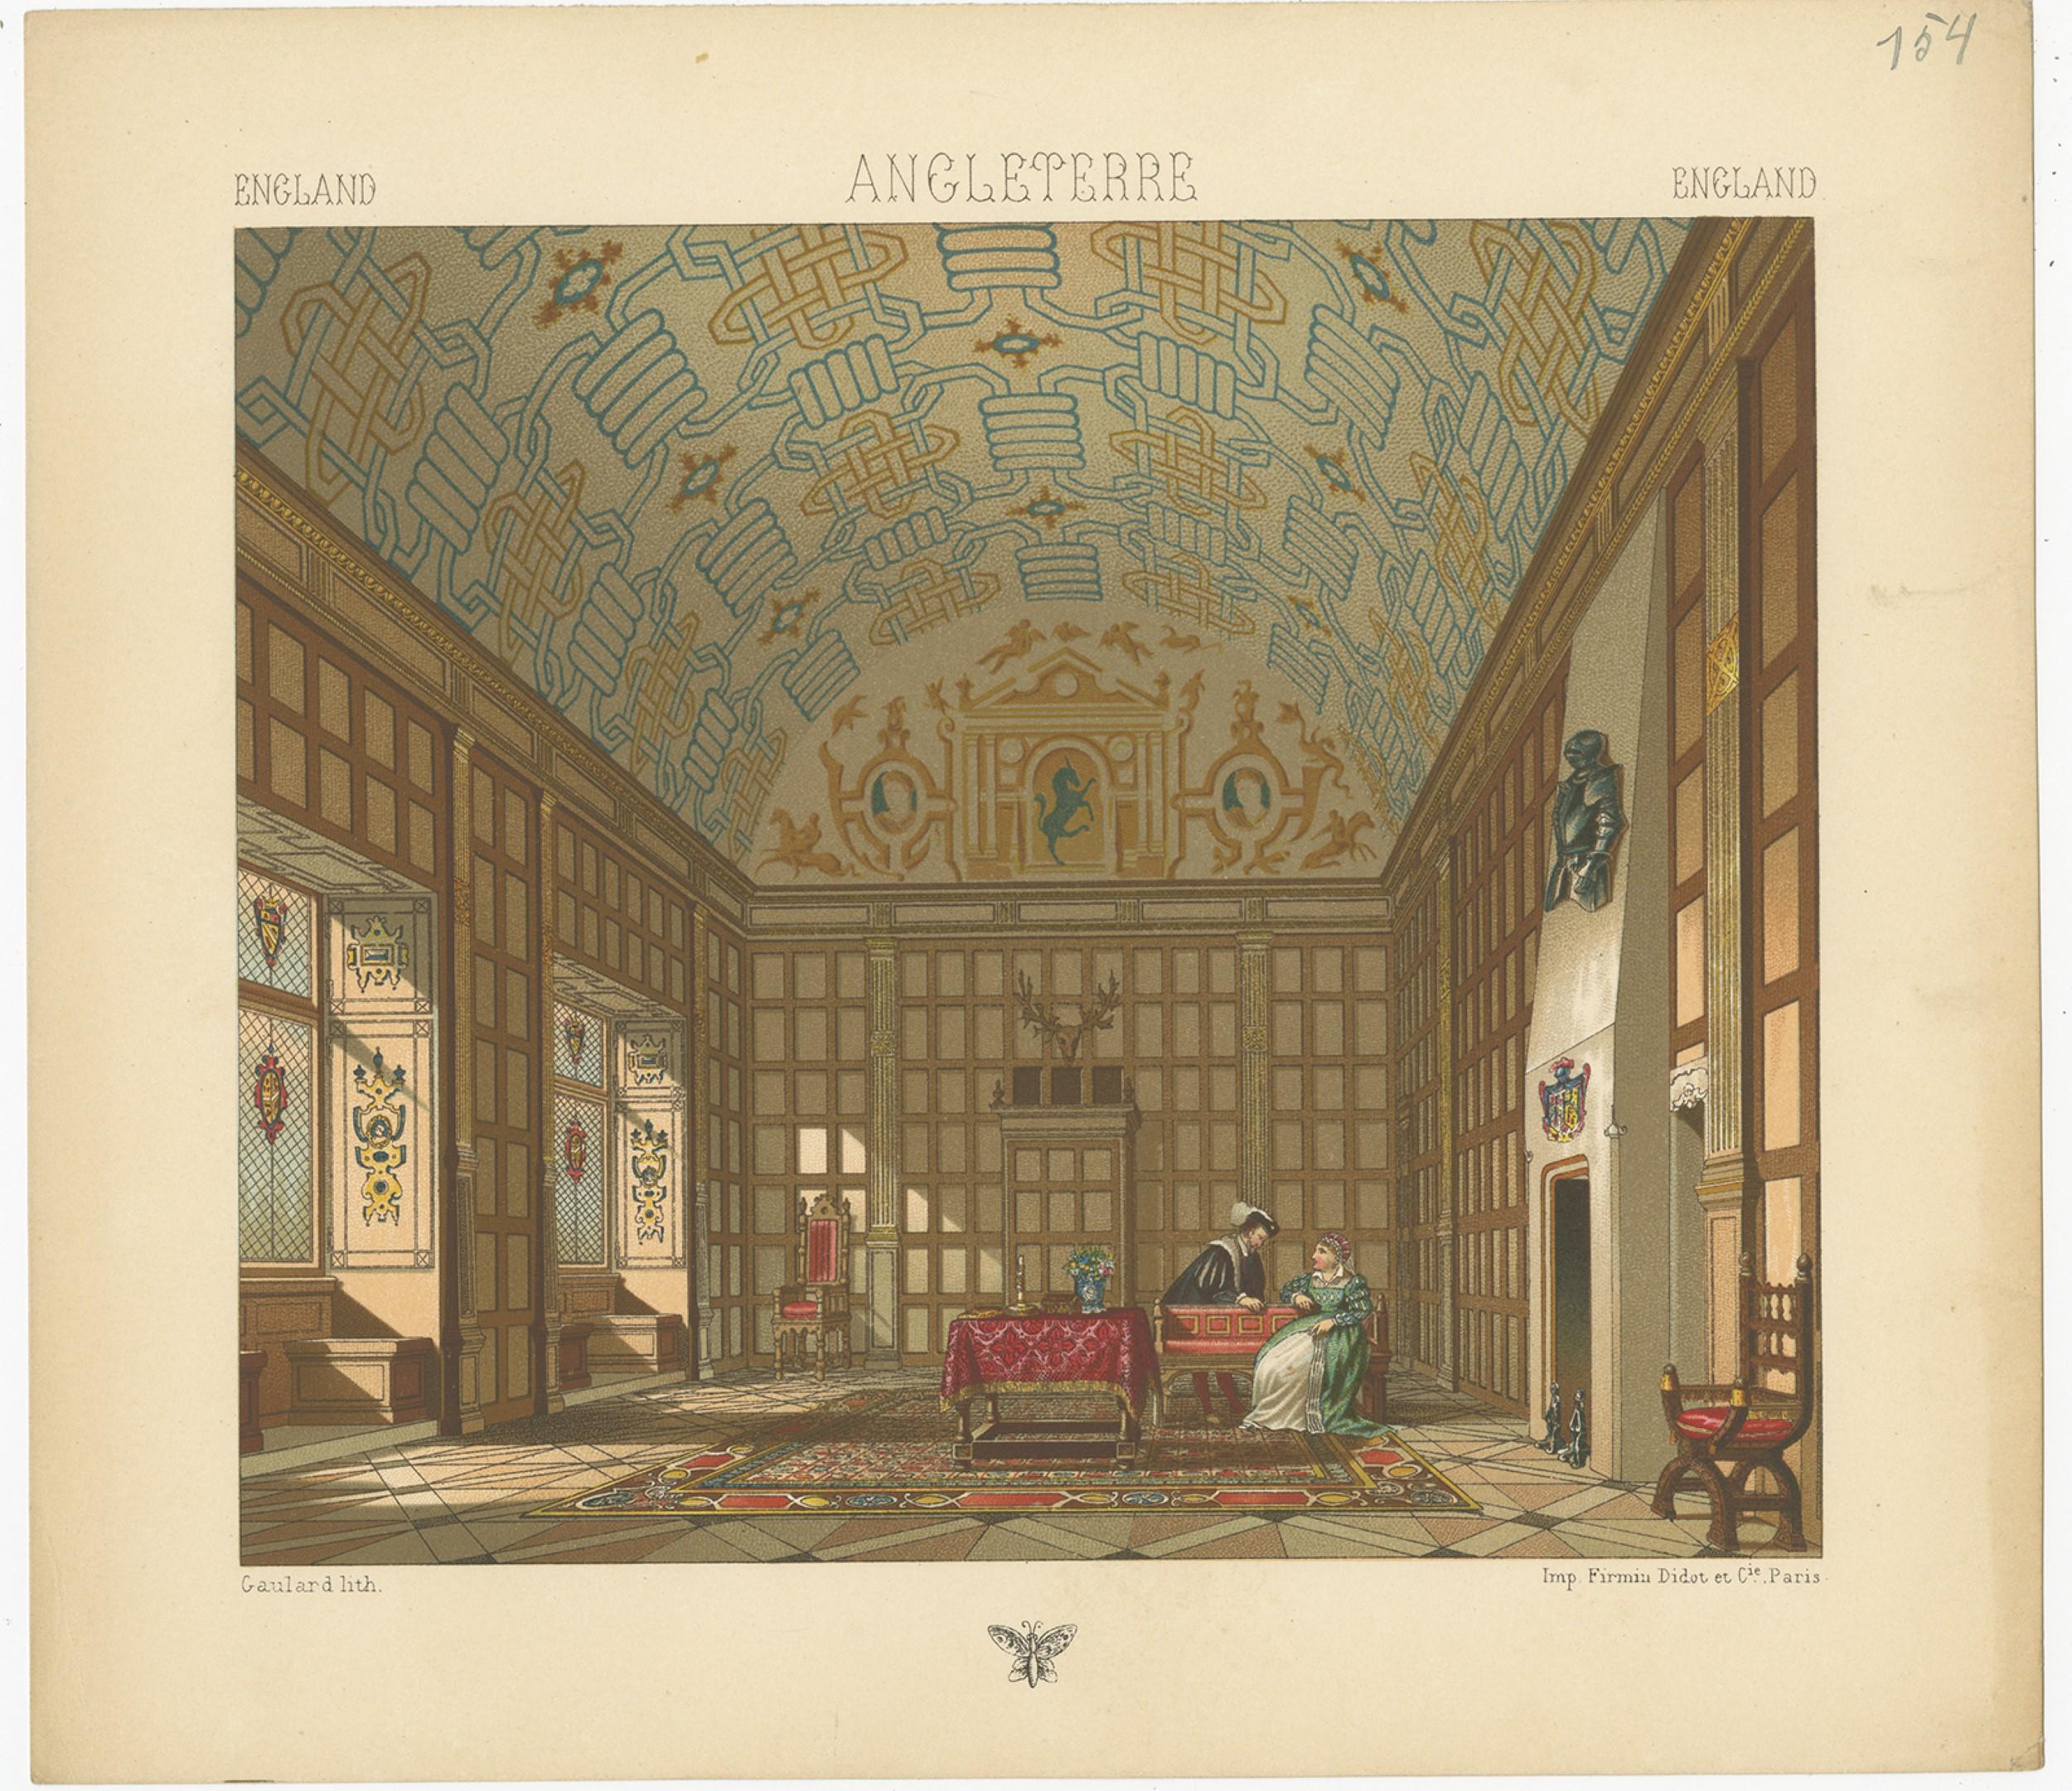 Antique print titled 'England - Angleterre - England'. Chromolithograph of English Living Room. This print originates from 'Le Costume Historique' by M.A. Racinet. Published, circa 1880.
 
 